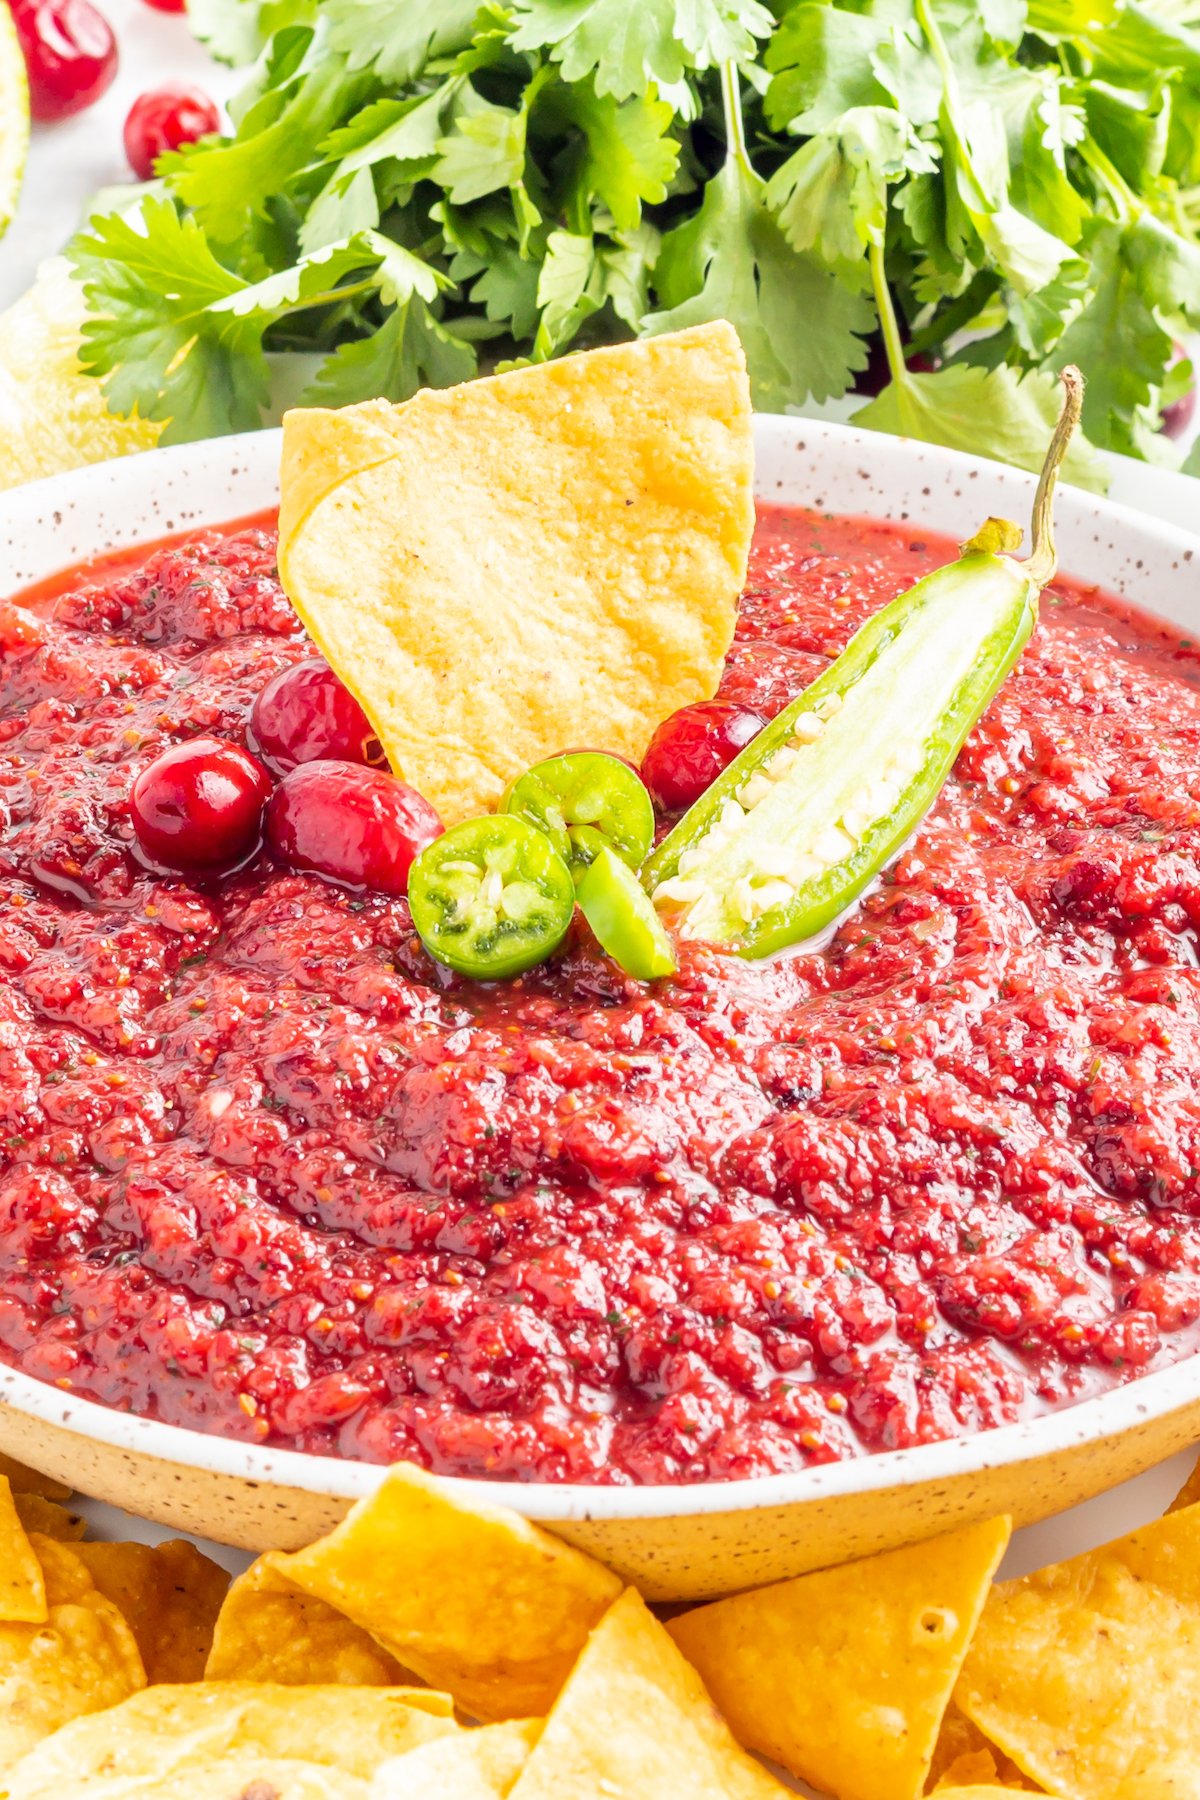 Cranberry salsa sits in a large white bowl. It is garnished with fresh cranberries, a serrano pepper sliced in half, and a tortilla chip.